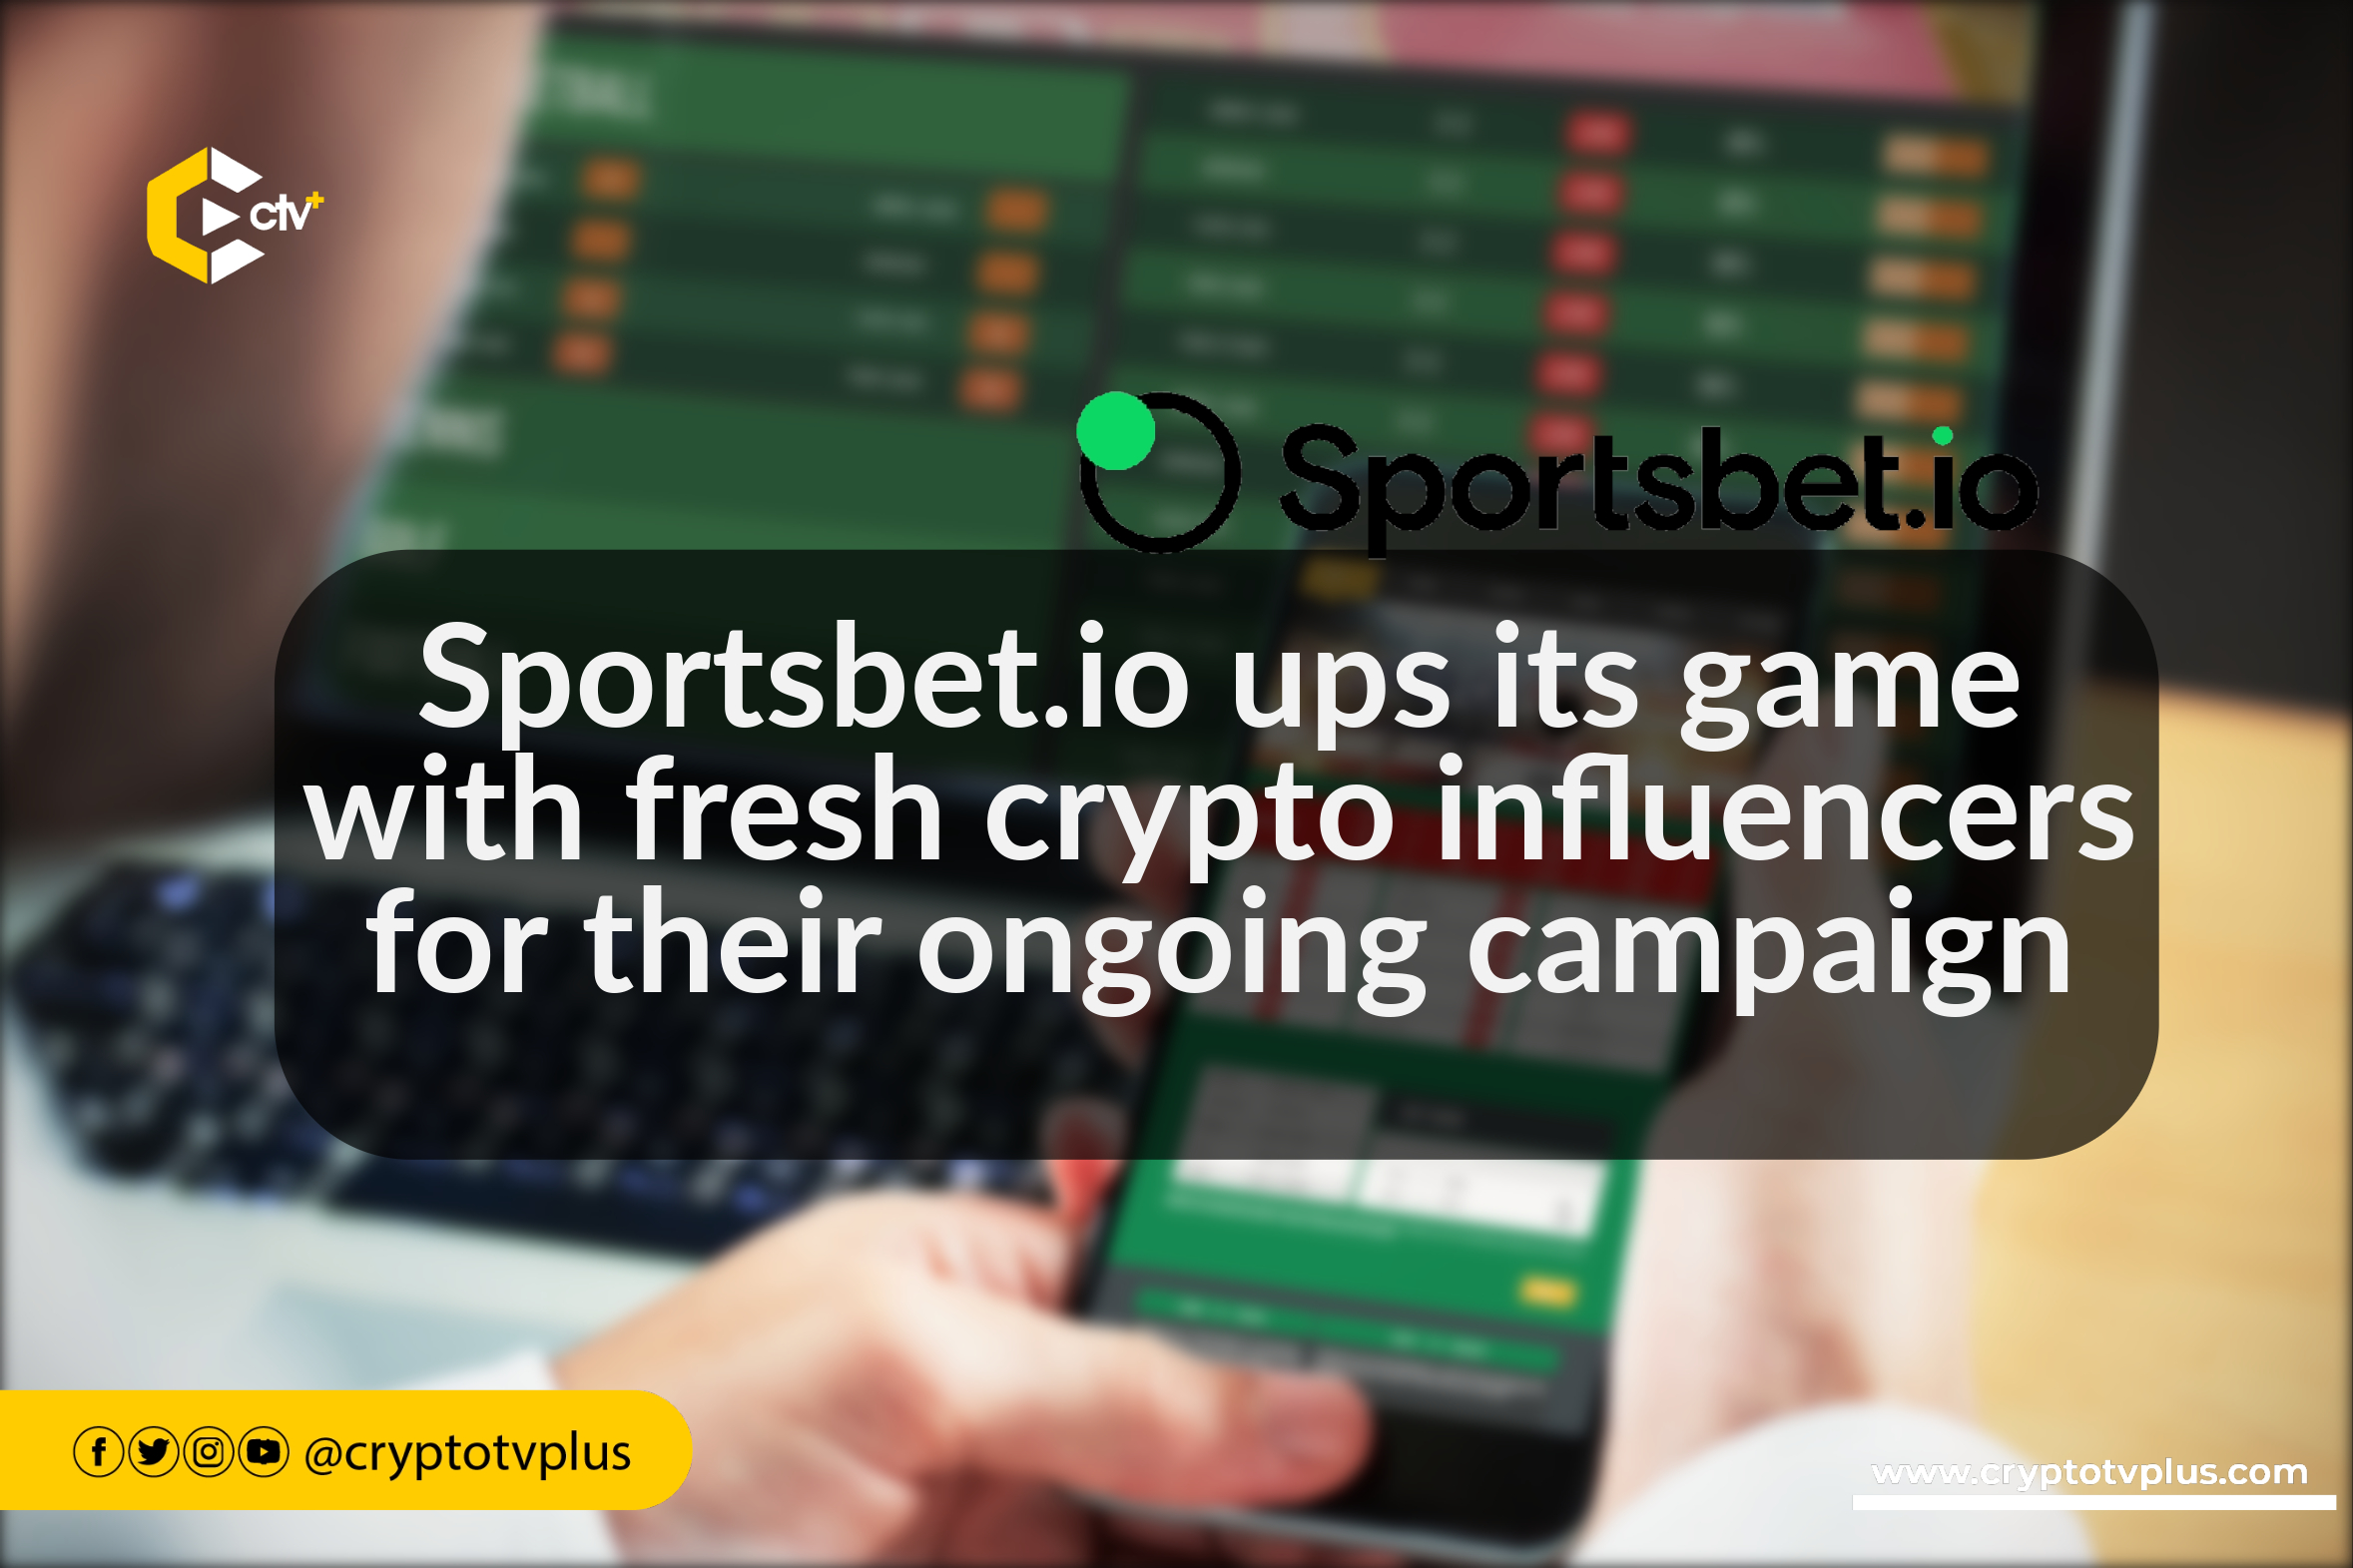 Sportsbet.io ups its game with fresh crypto influencers for their ongoing campaign